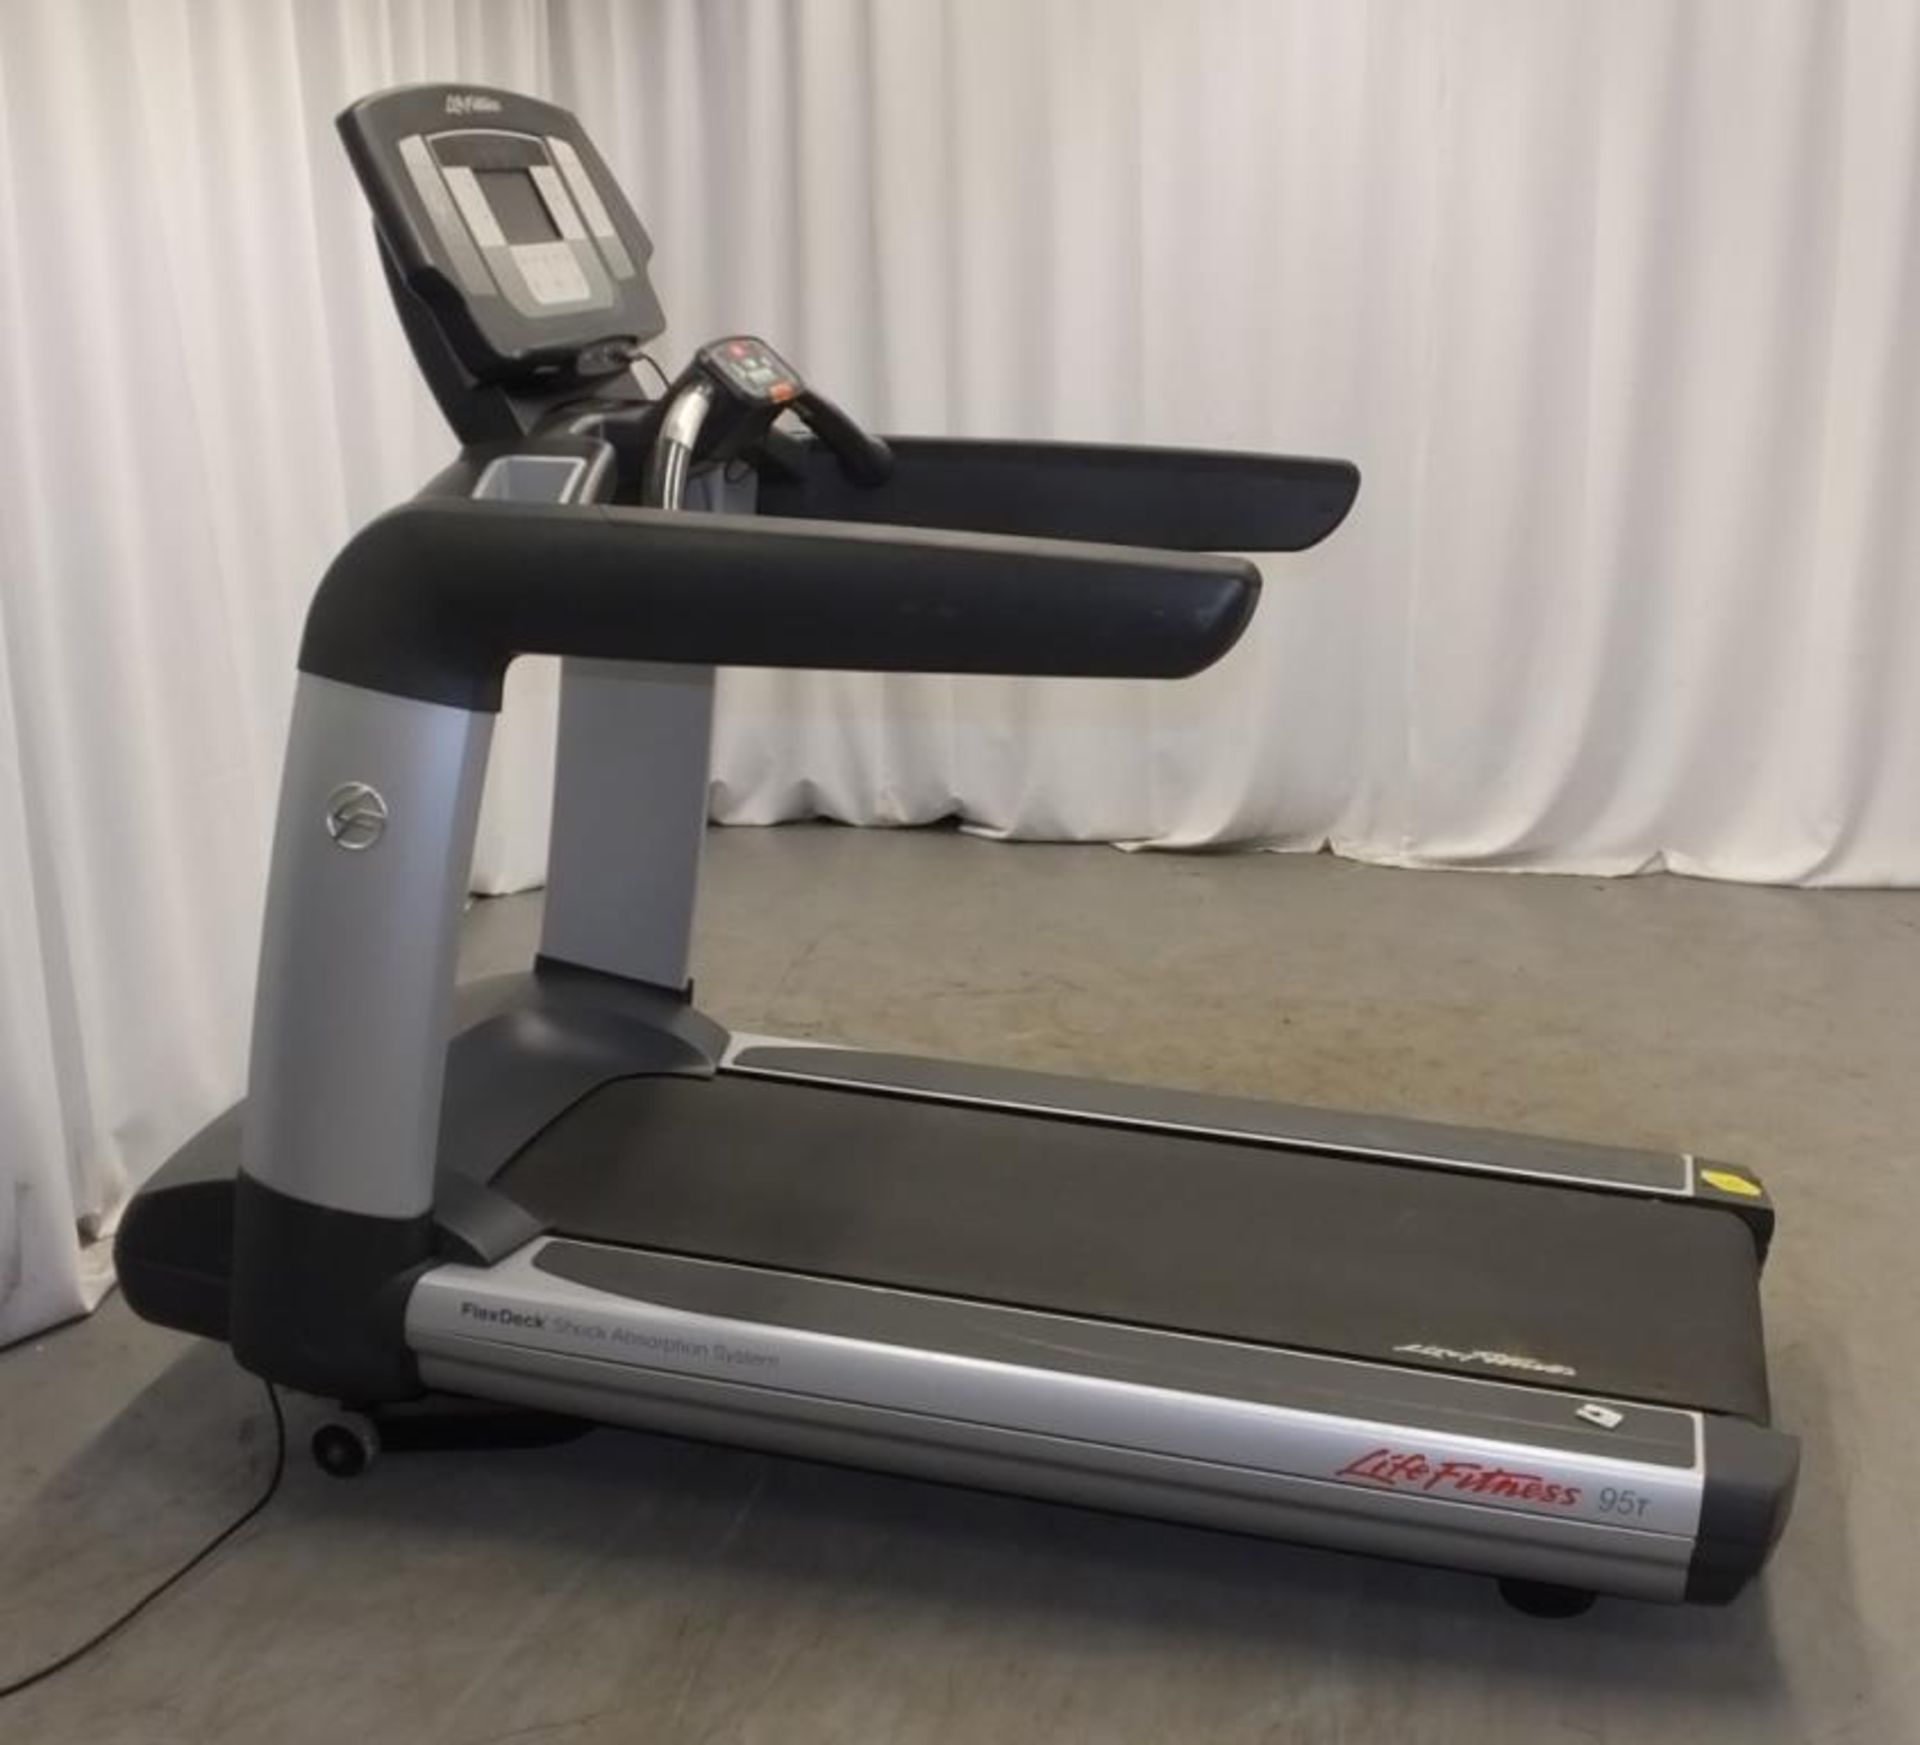 Life Fitness 95T FlexDeck shock absorption system treadmill - powers up - functionality untested